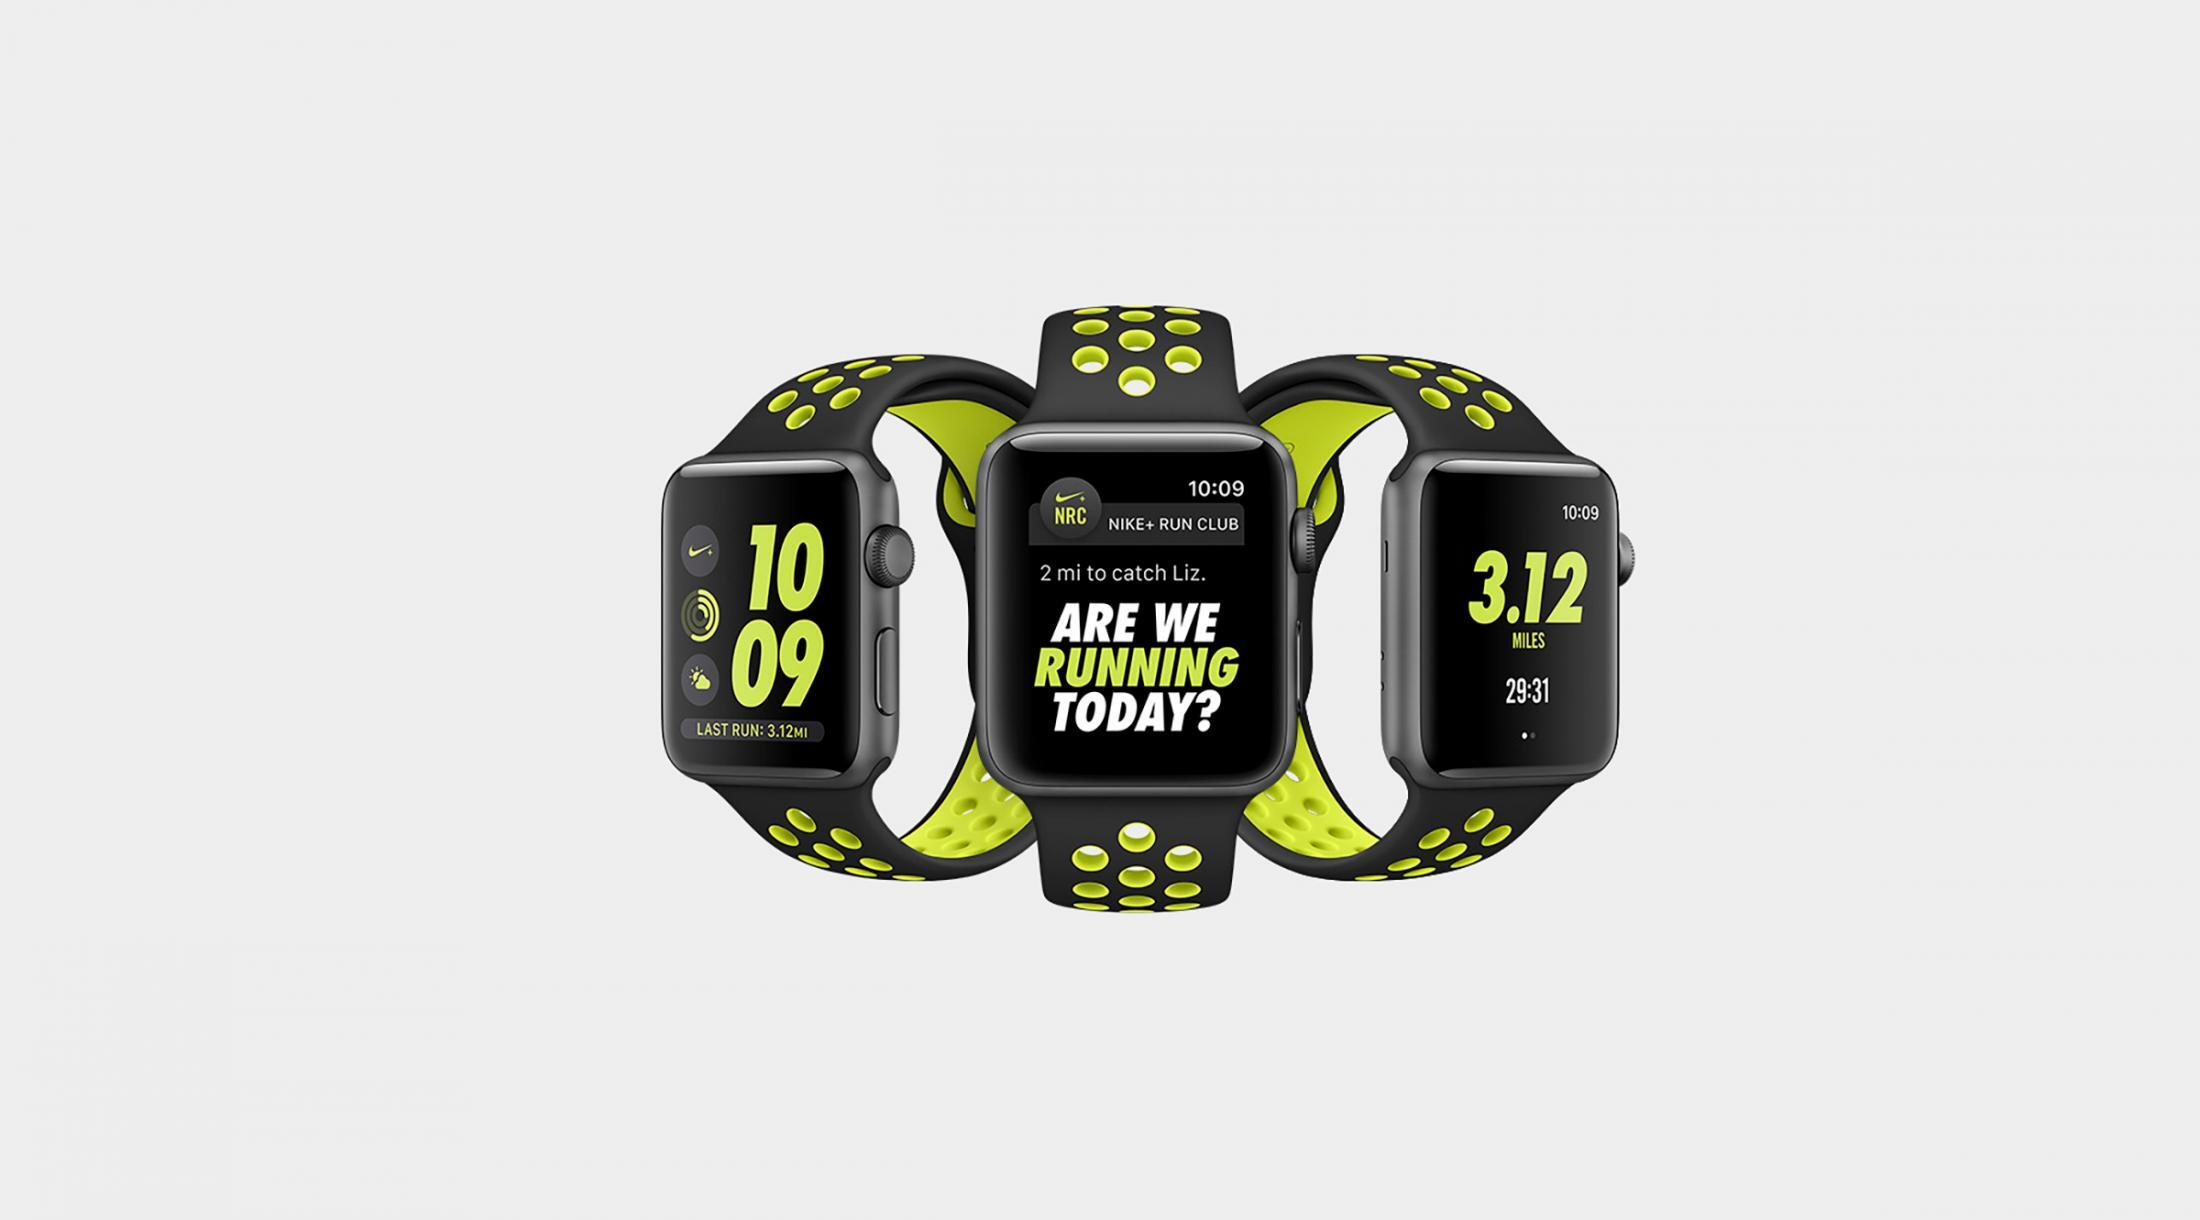 The Apple Watch Nike+'s visual for the Clio Sports.